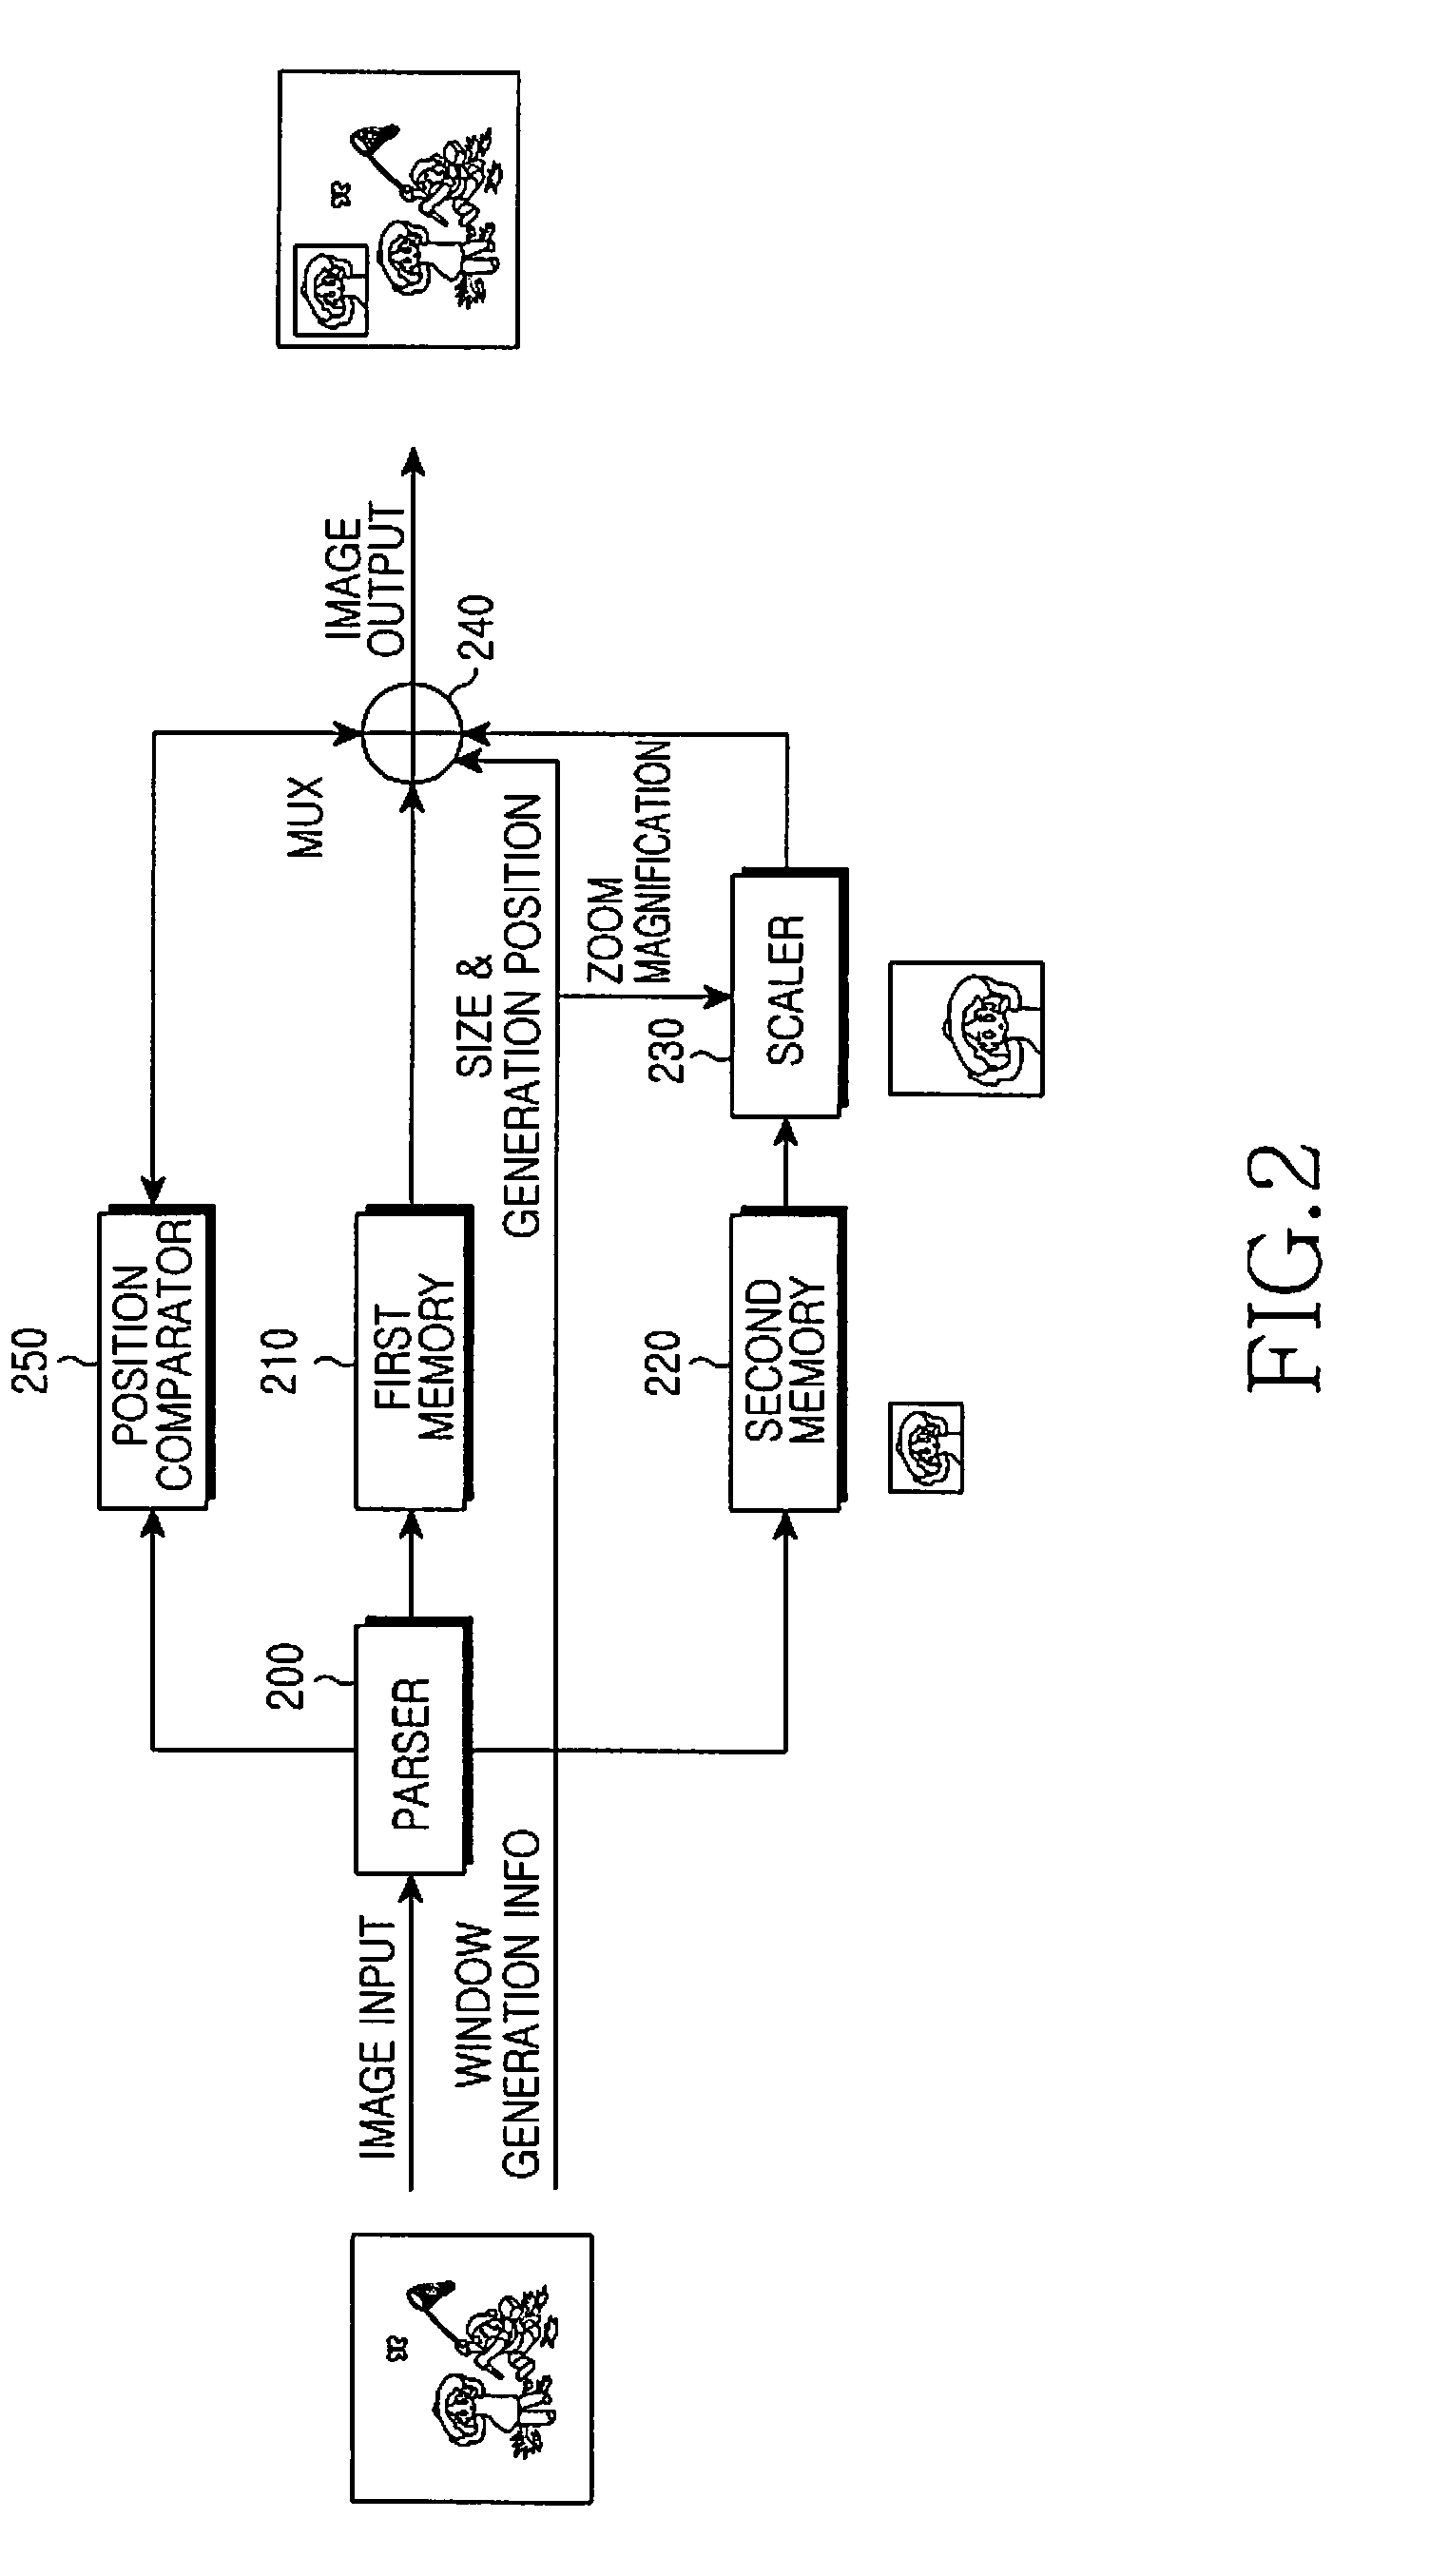 Apparatus and method for displaying an enlarged target region of a reproduced image